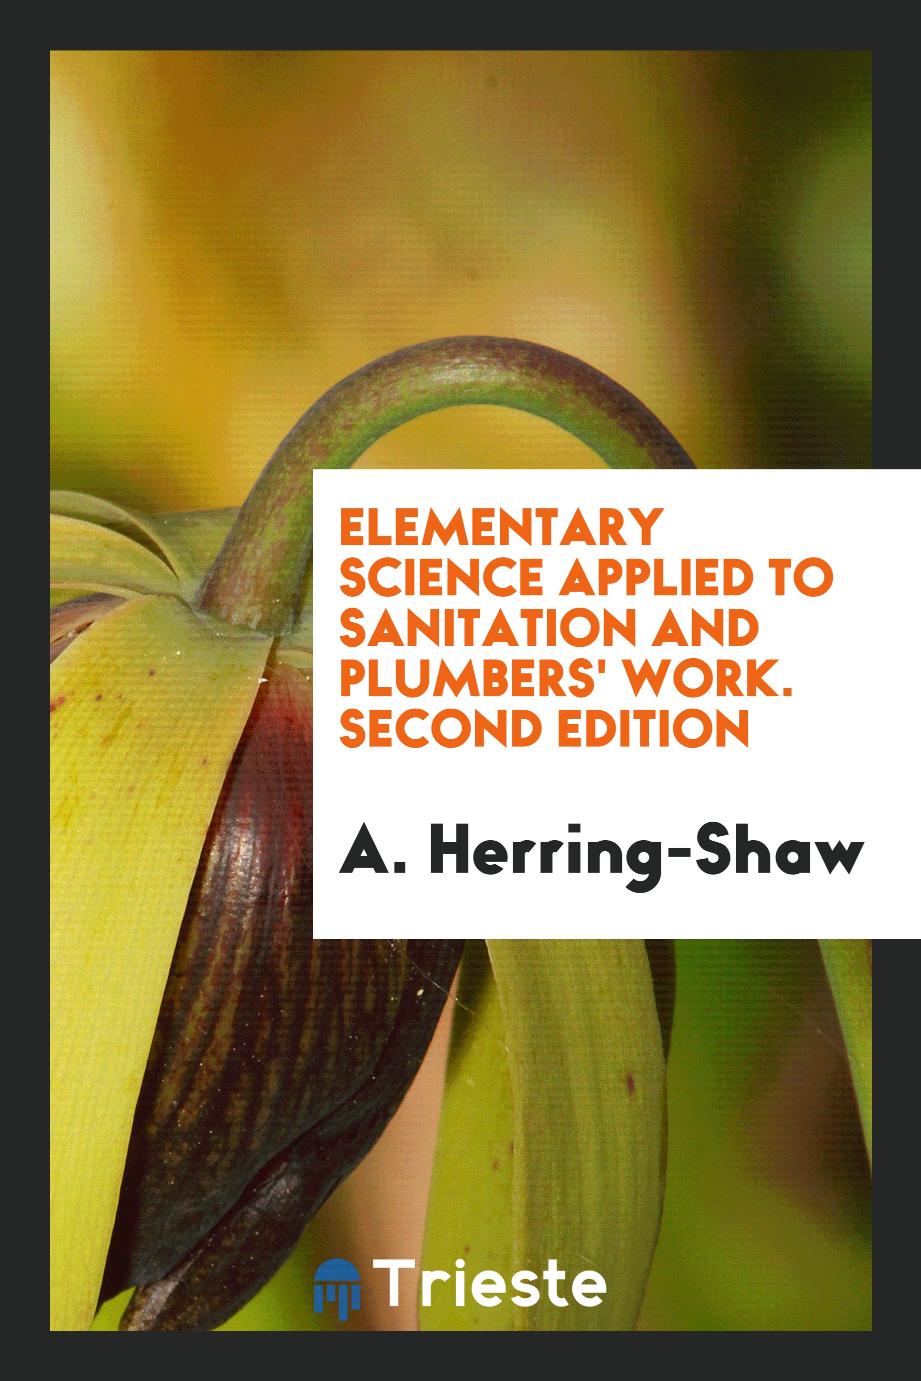 Elementary science applied to sanitation and plumbers' work. Second edition